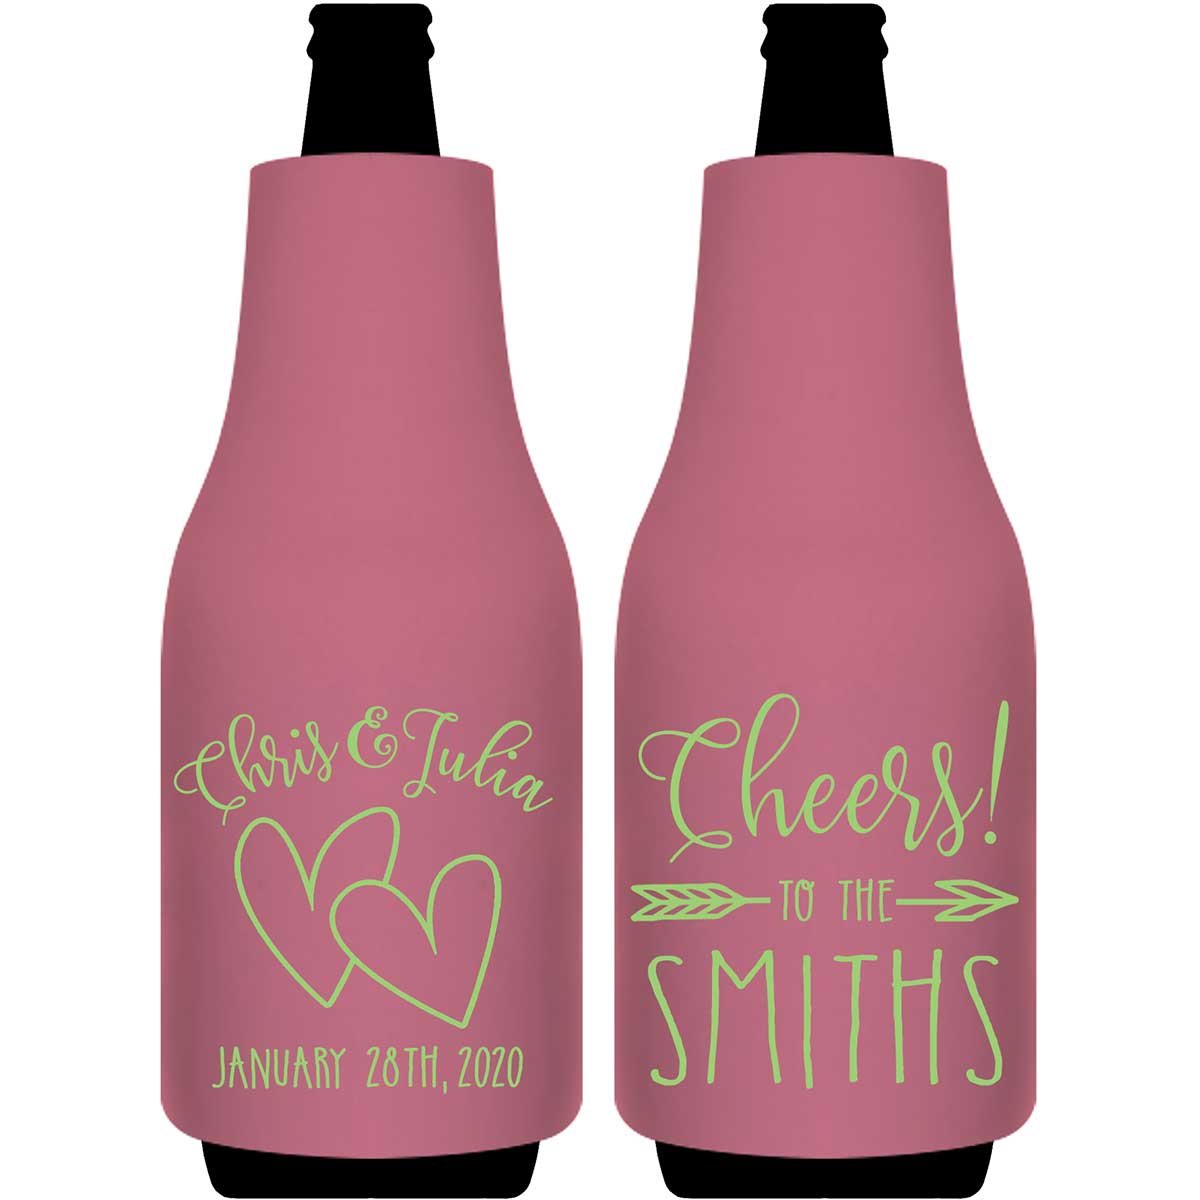 Intertwined Hearts 4B Cheers Foldable Bottle Sleeve Koozies Wedding Gifts for Guests